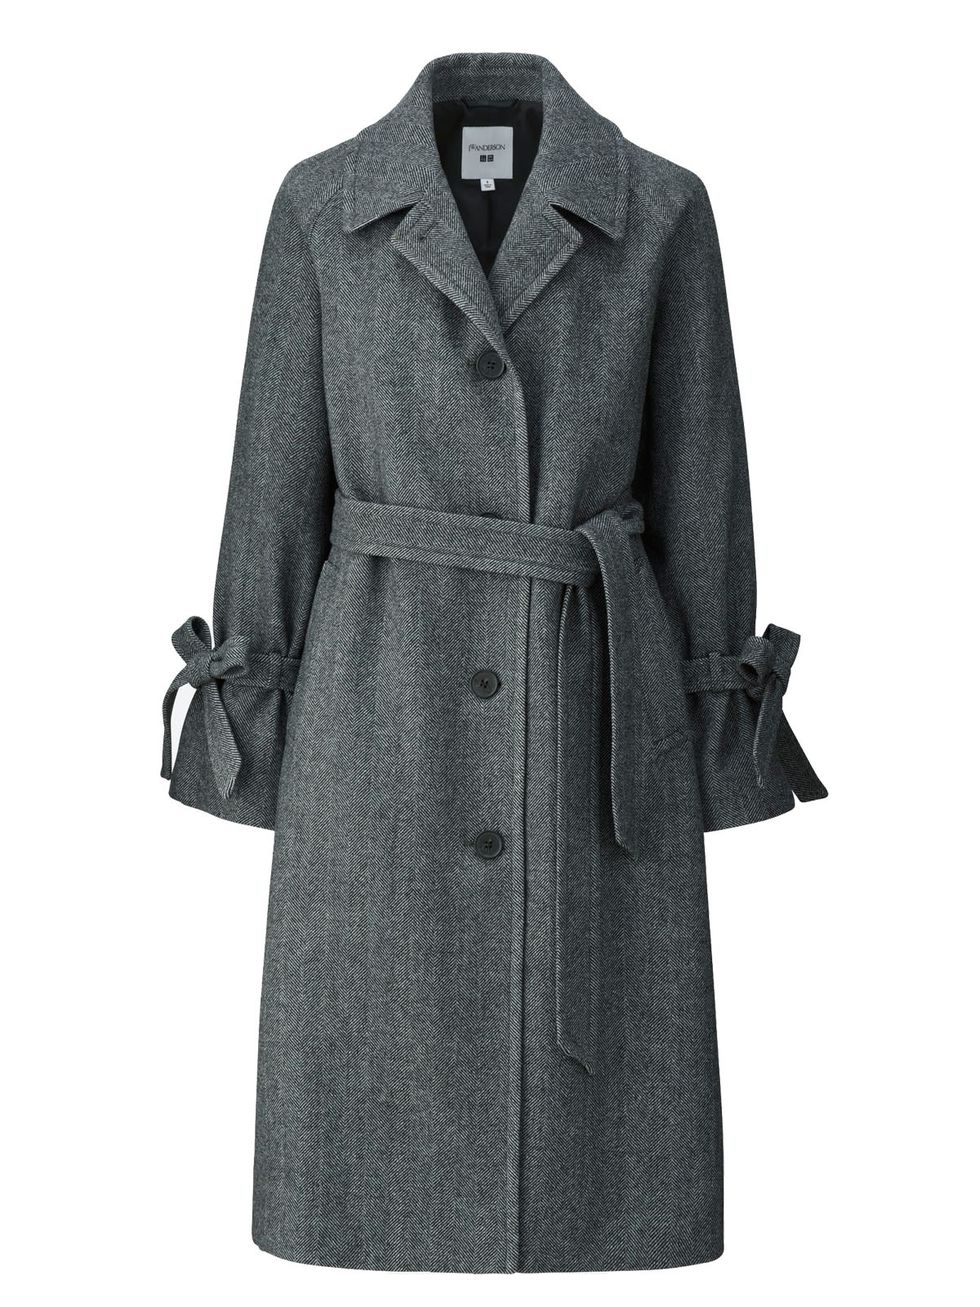 Clothing, Coat, Trench coat, Overcoat, Outerwear, Sleeve, Collar, Duster, Jacket, Dress, 